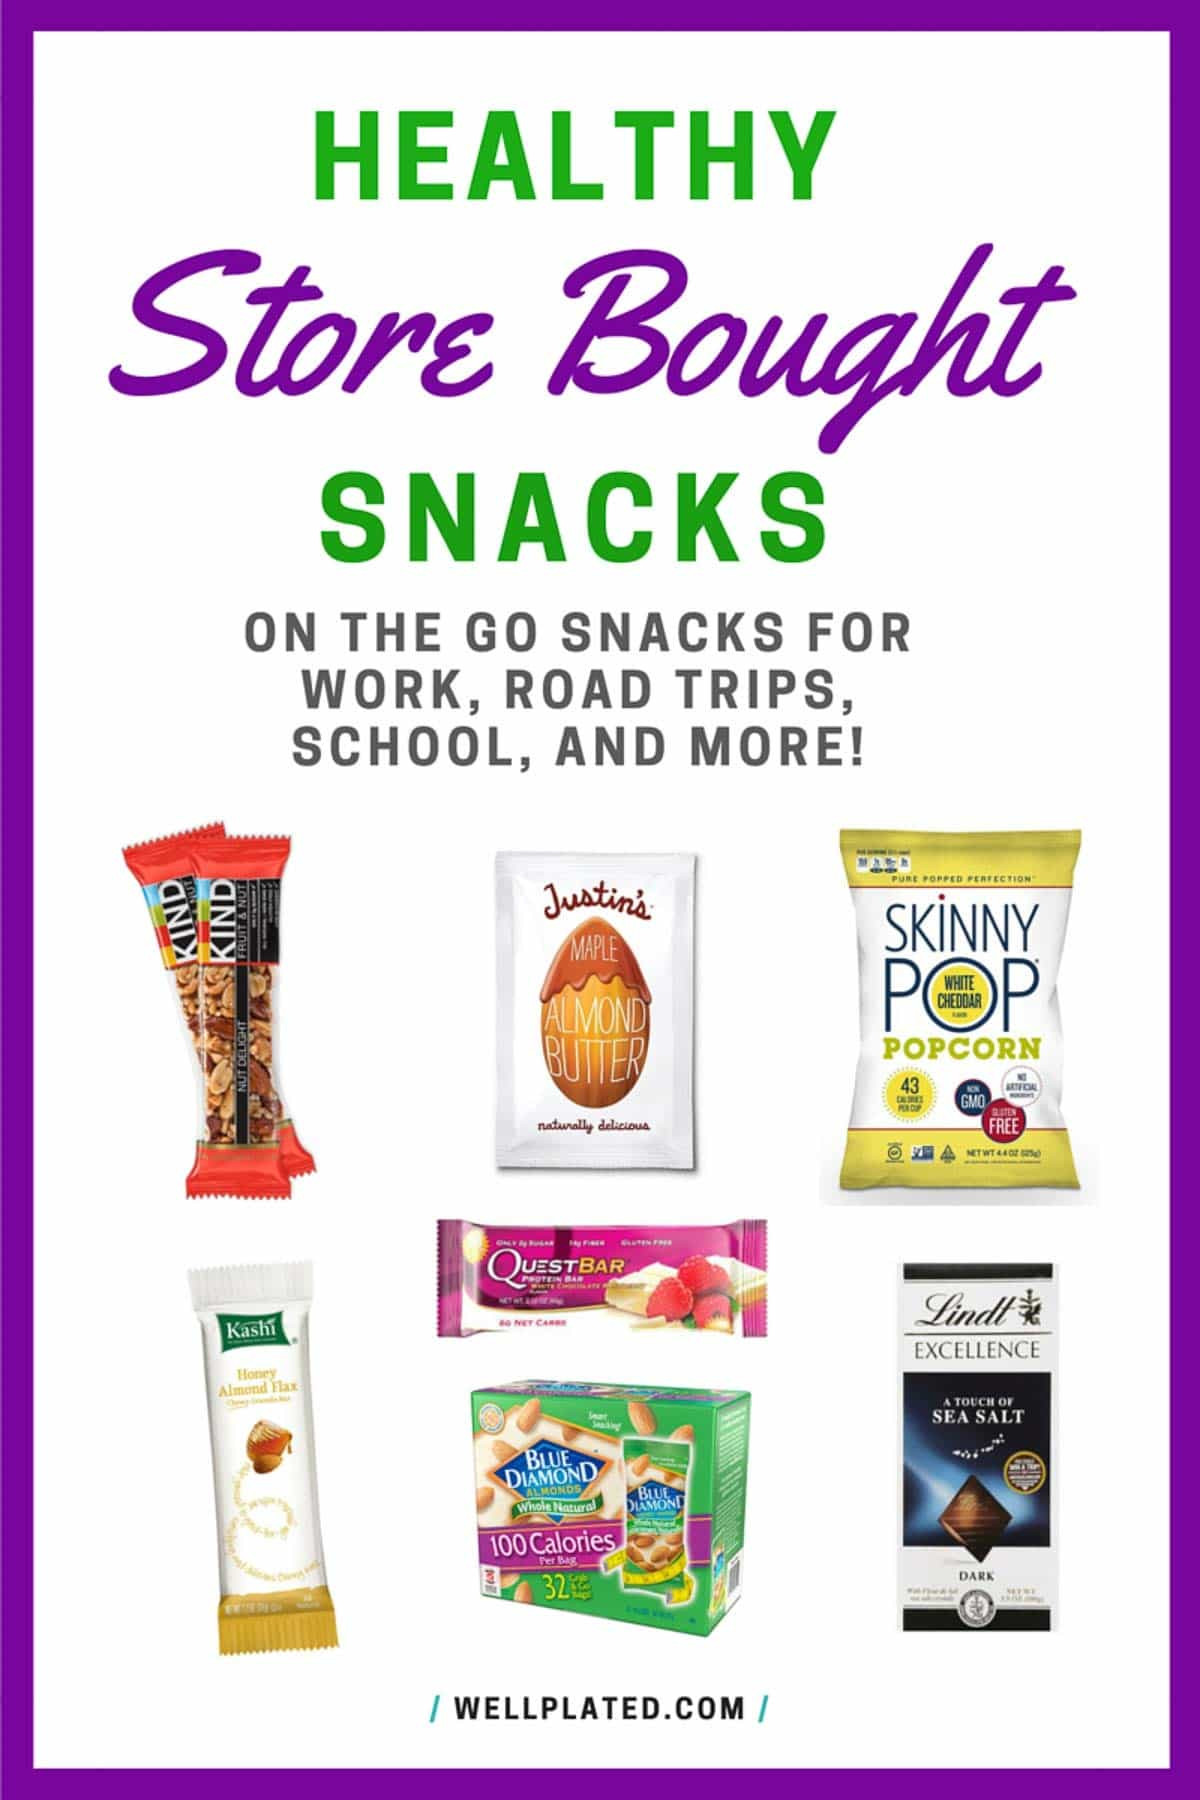 Healthy Snacks From The Store
 The Best Healthy Store Bought Snacks